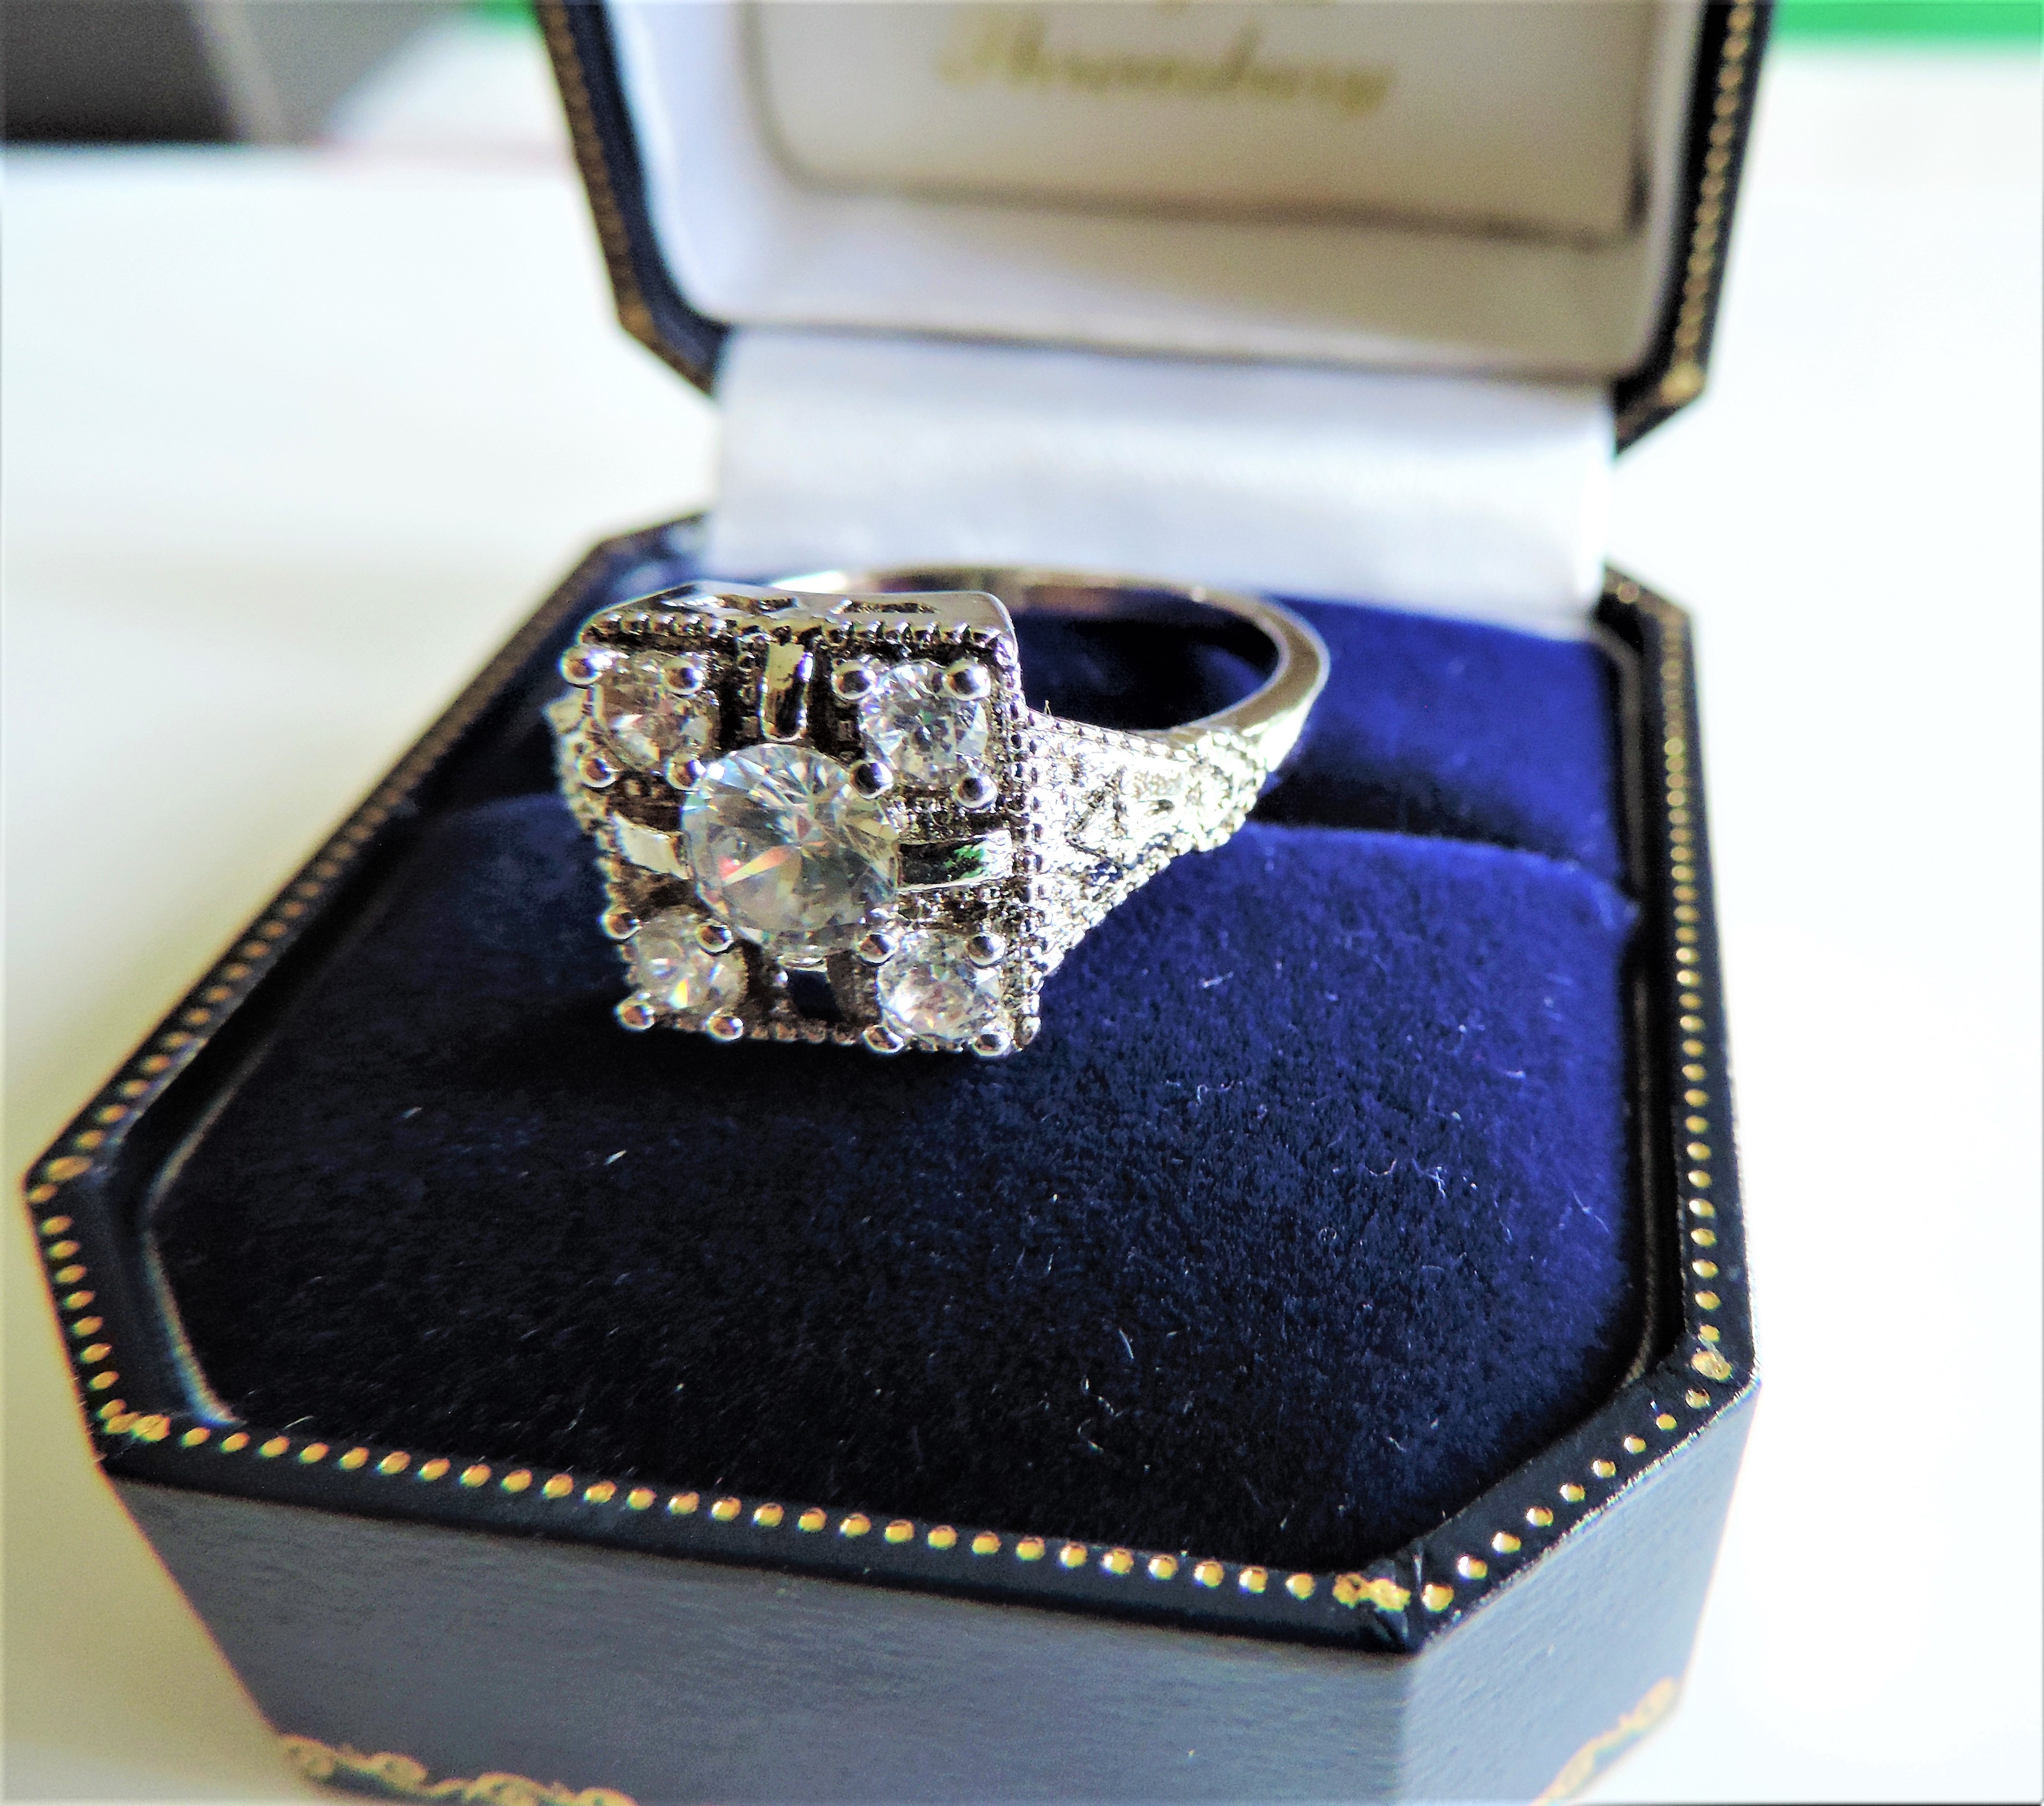 Sterling Silver Art Deco Style White Sapphire Ring New with Gift Box - Image 4 of 5